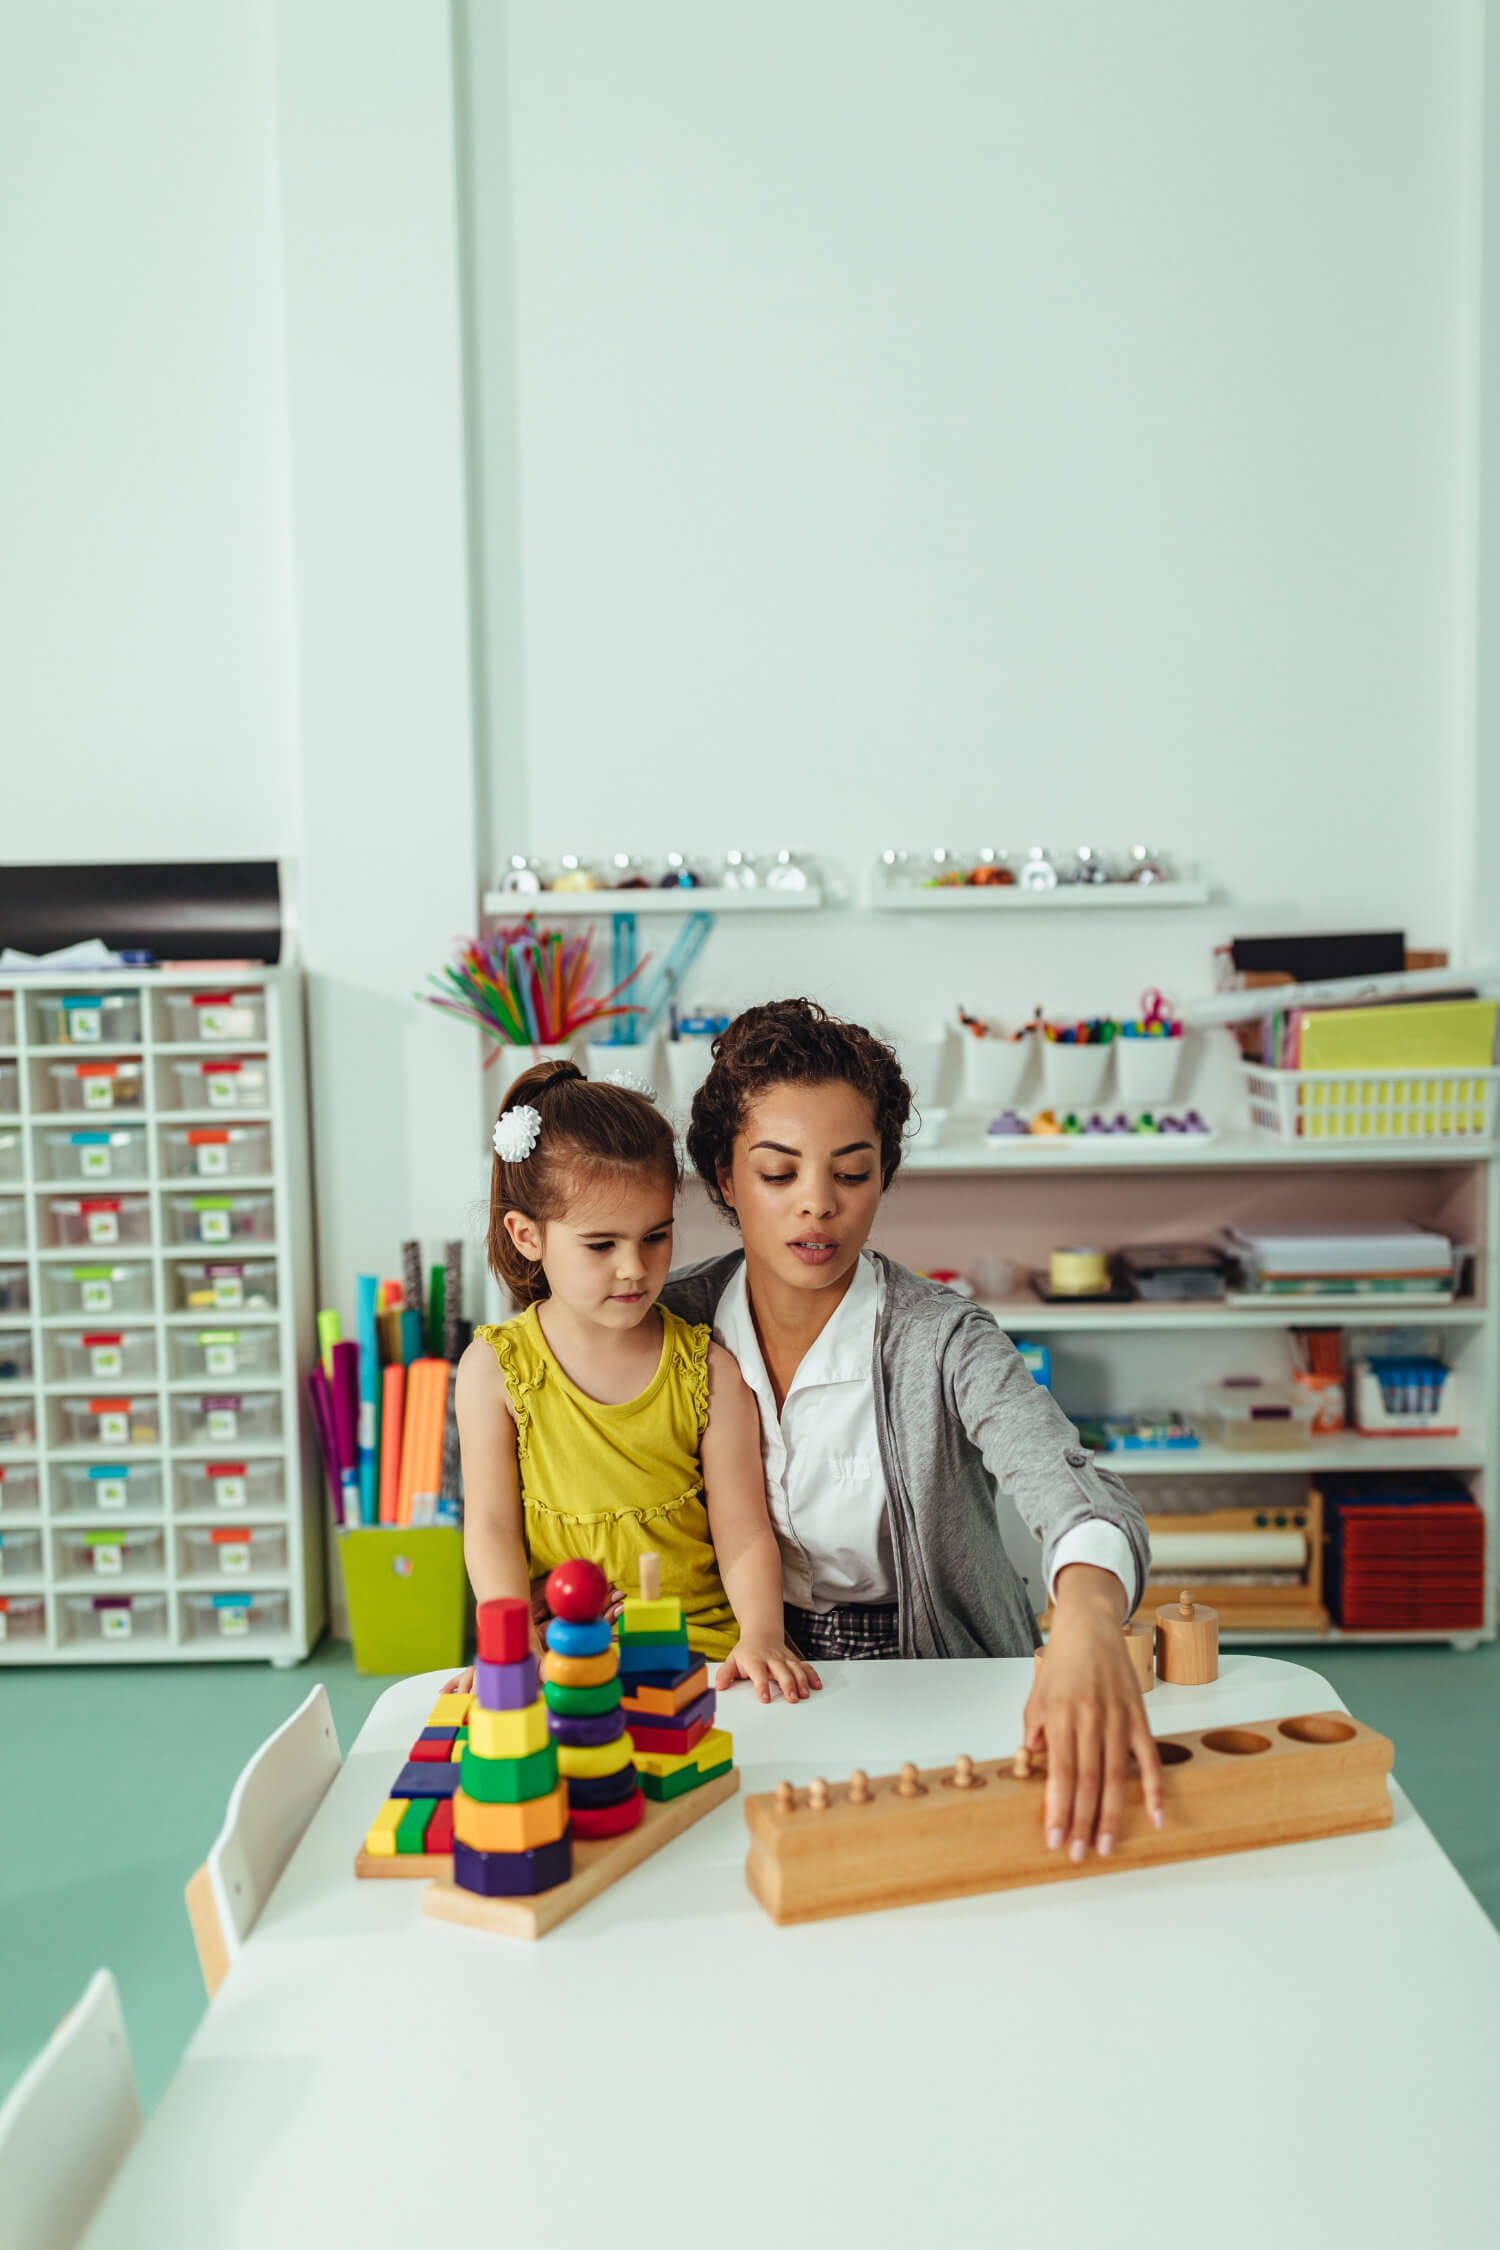 A teacher assists a young student with educational toys in a classroom. The room is equipped with various learning materials and storage shelves.